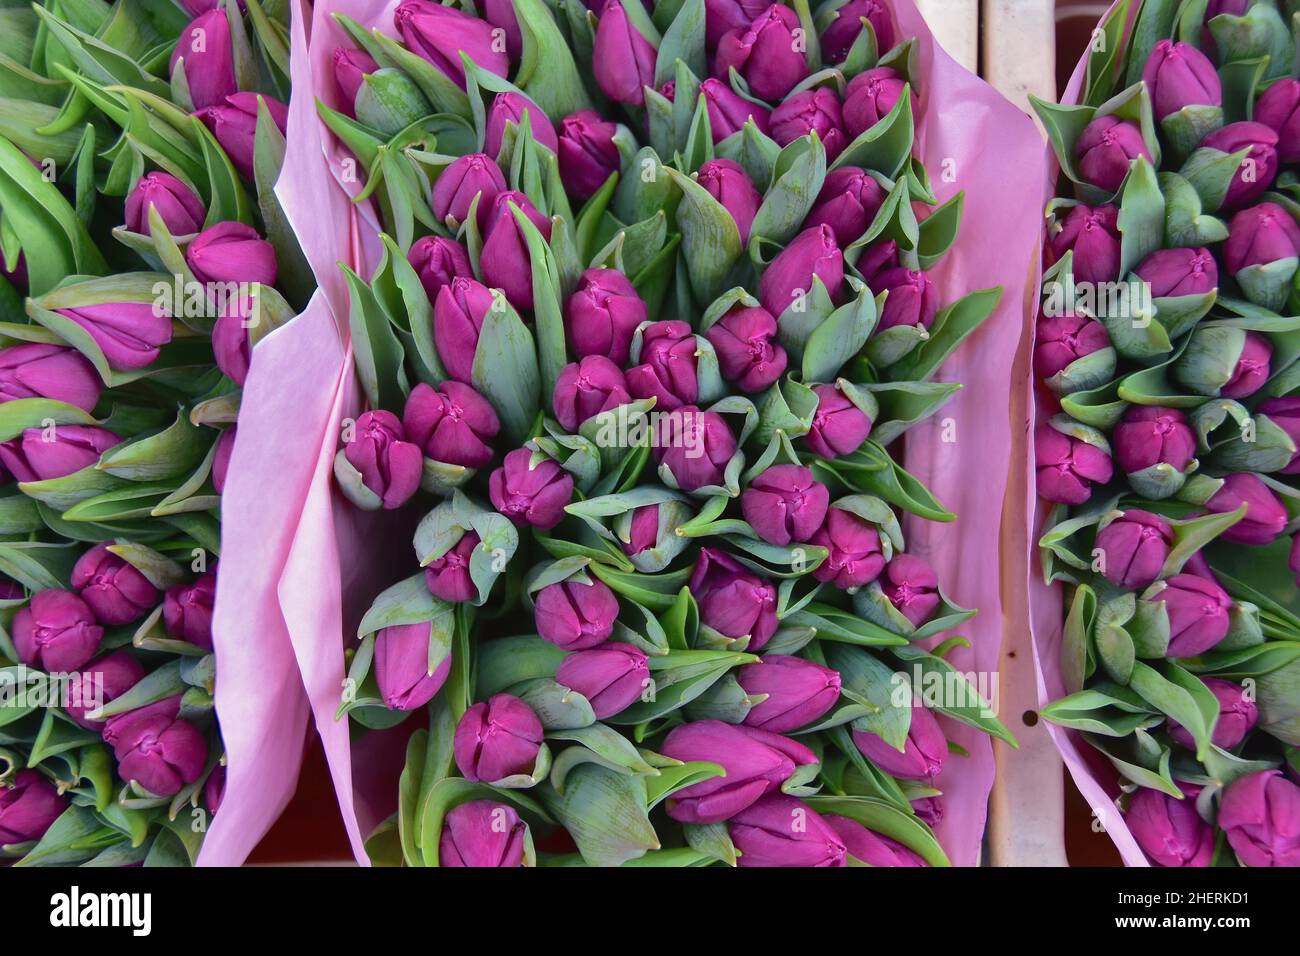 Purple tulips at flower market in Amsterdam, Holland Stock Photo